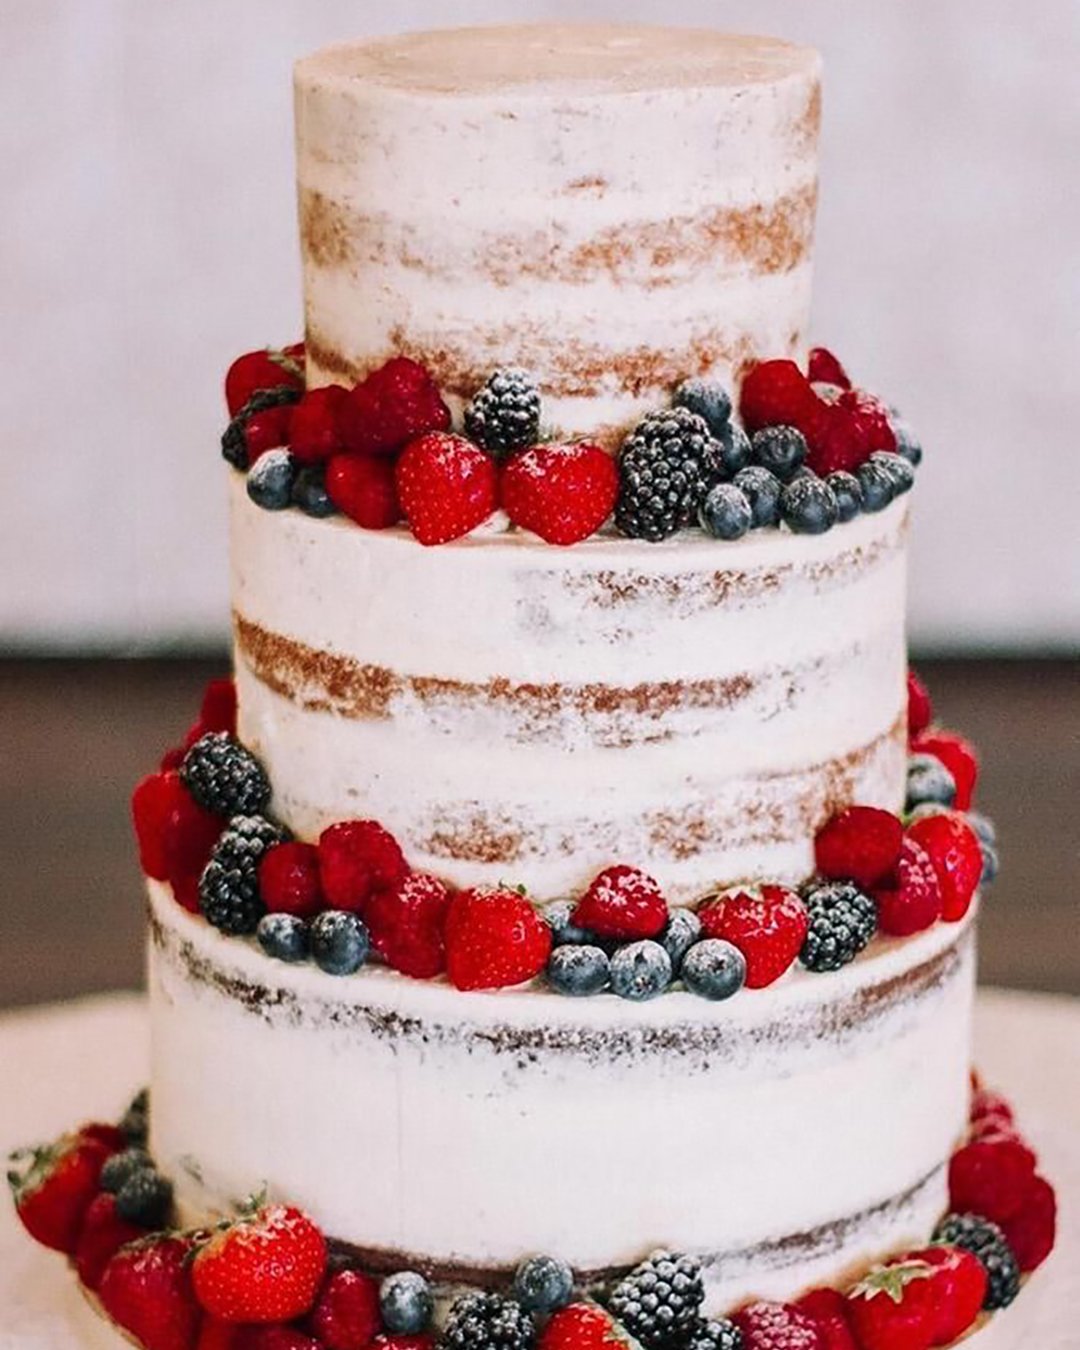 simple elegant chic wedding cakes cake with fruits baked blessings